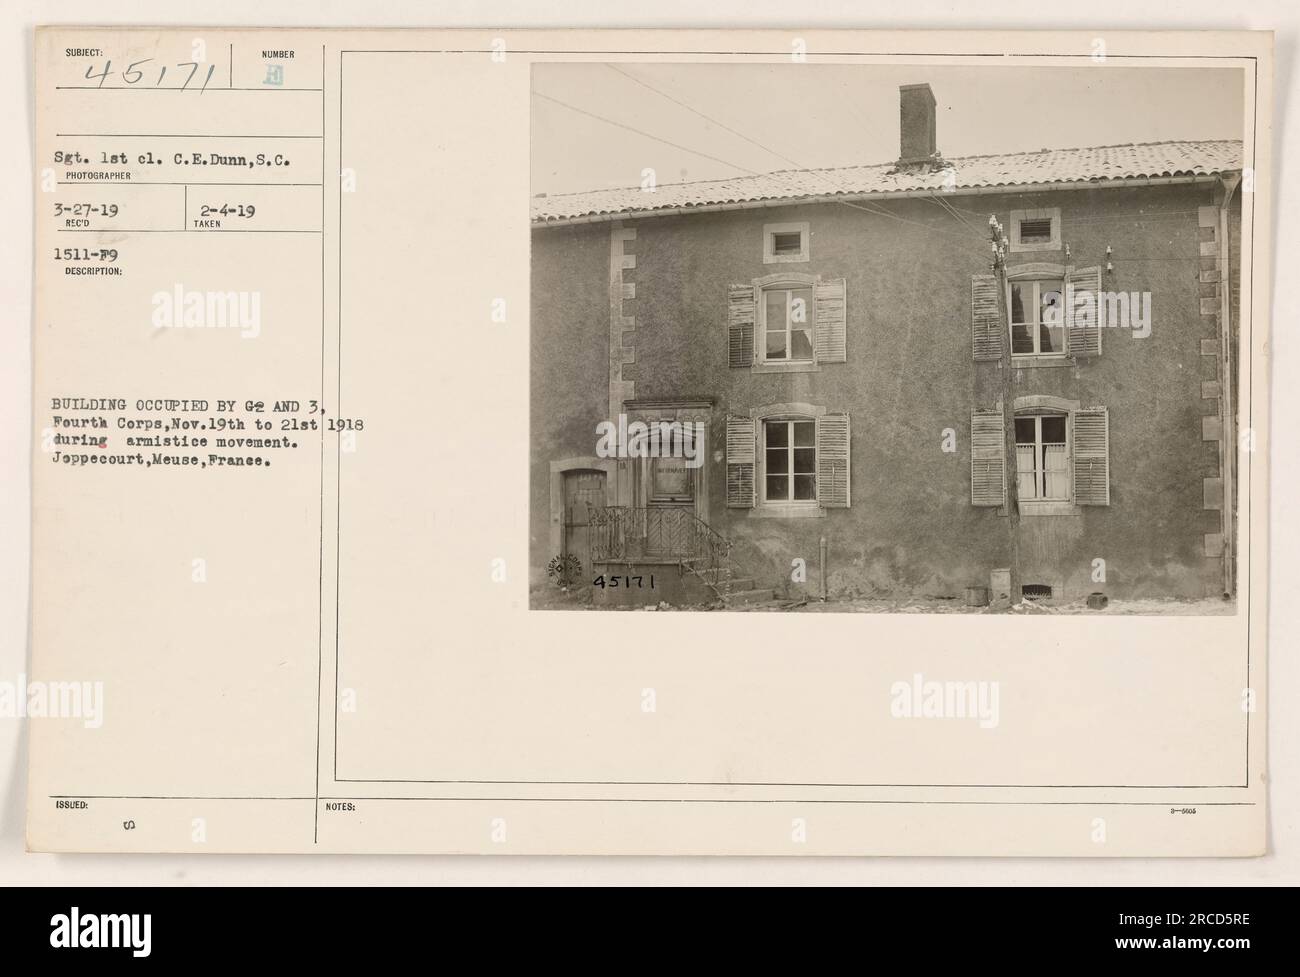 Building occupied by G2 and 3, Fourth Corps, Nov. 19th to 21st, 1918 during armistice movement. Located in Jeppecourt, Meuse, France. Image taken by Sgt. 1st cl. C.E.Dunn, S.C. on 3-27-19 and issued with the number 1511-P9. Description noted on 2-4-19 as the building occupied by G2 and 3. Stock Photo